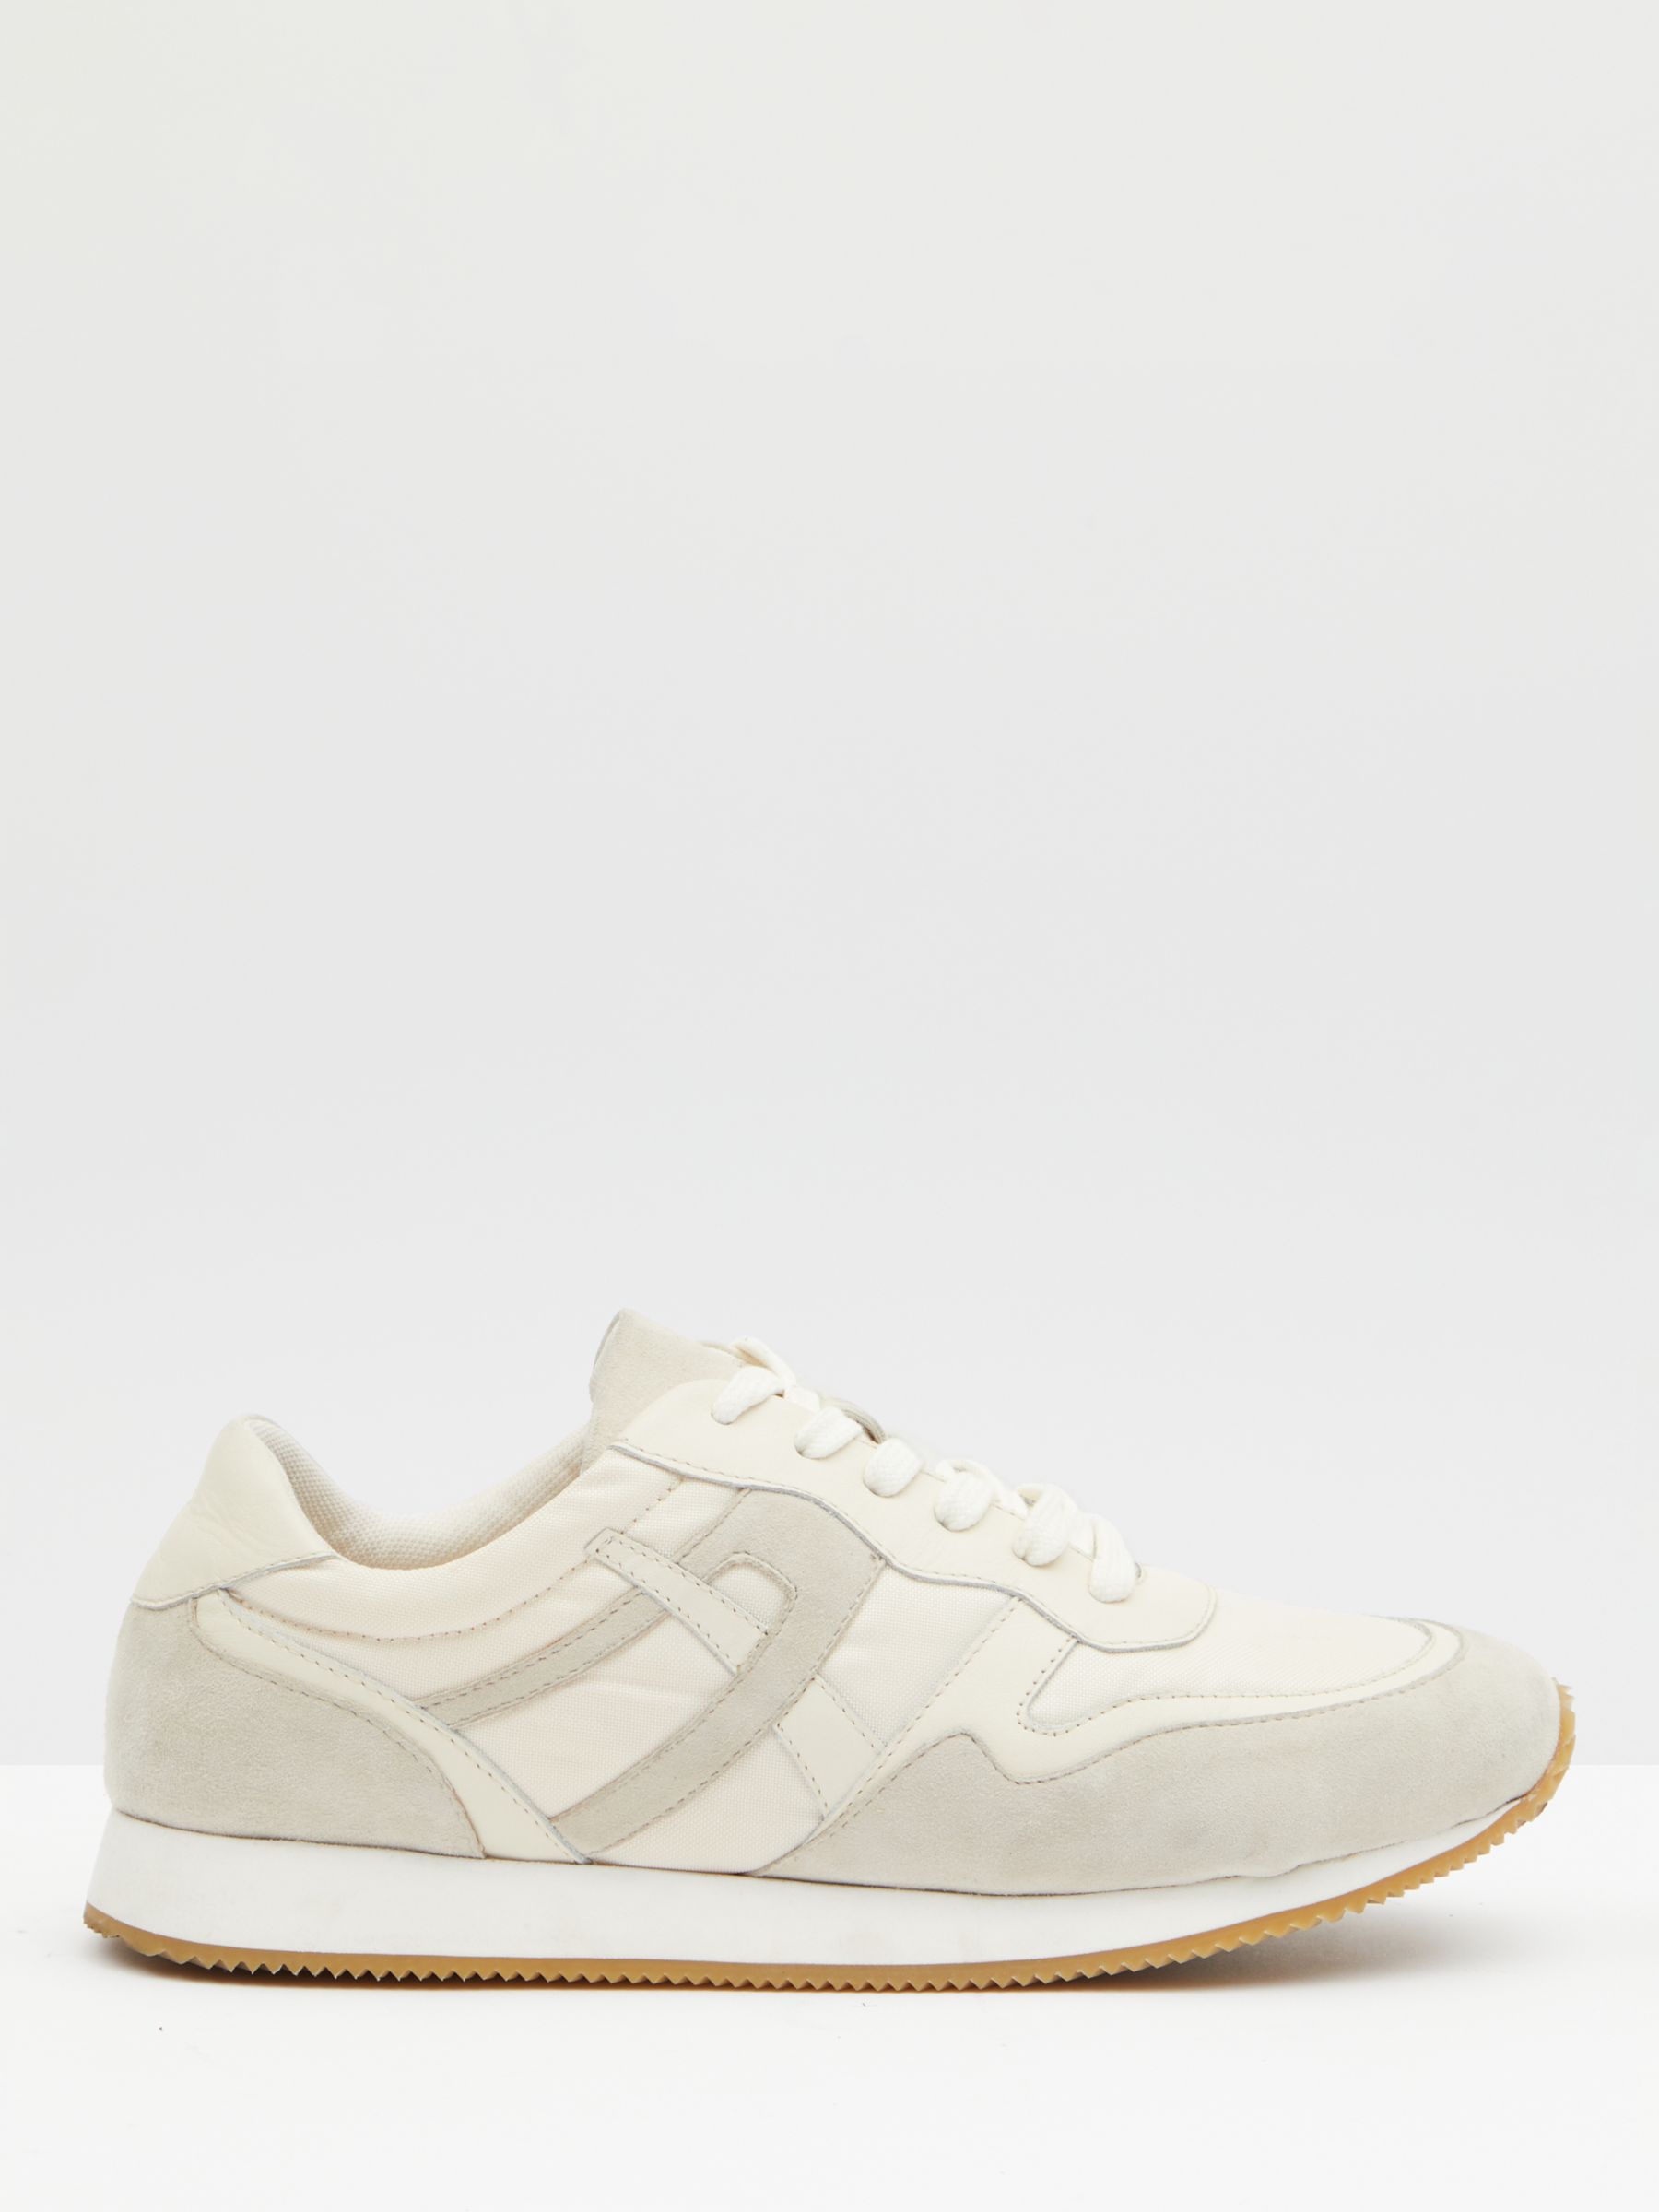 HUSH Rylee Retro Trainers, Neutral at John Lewis & Partners